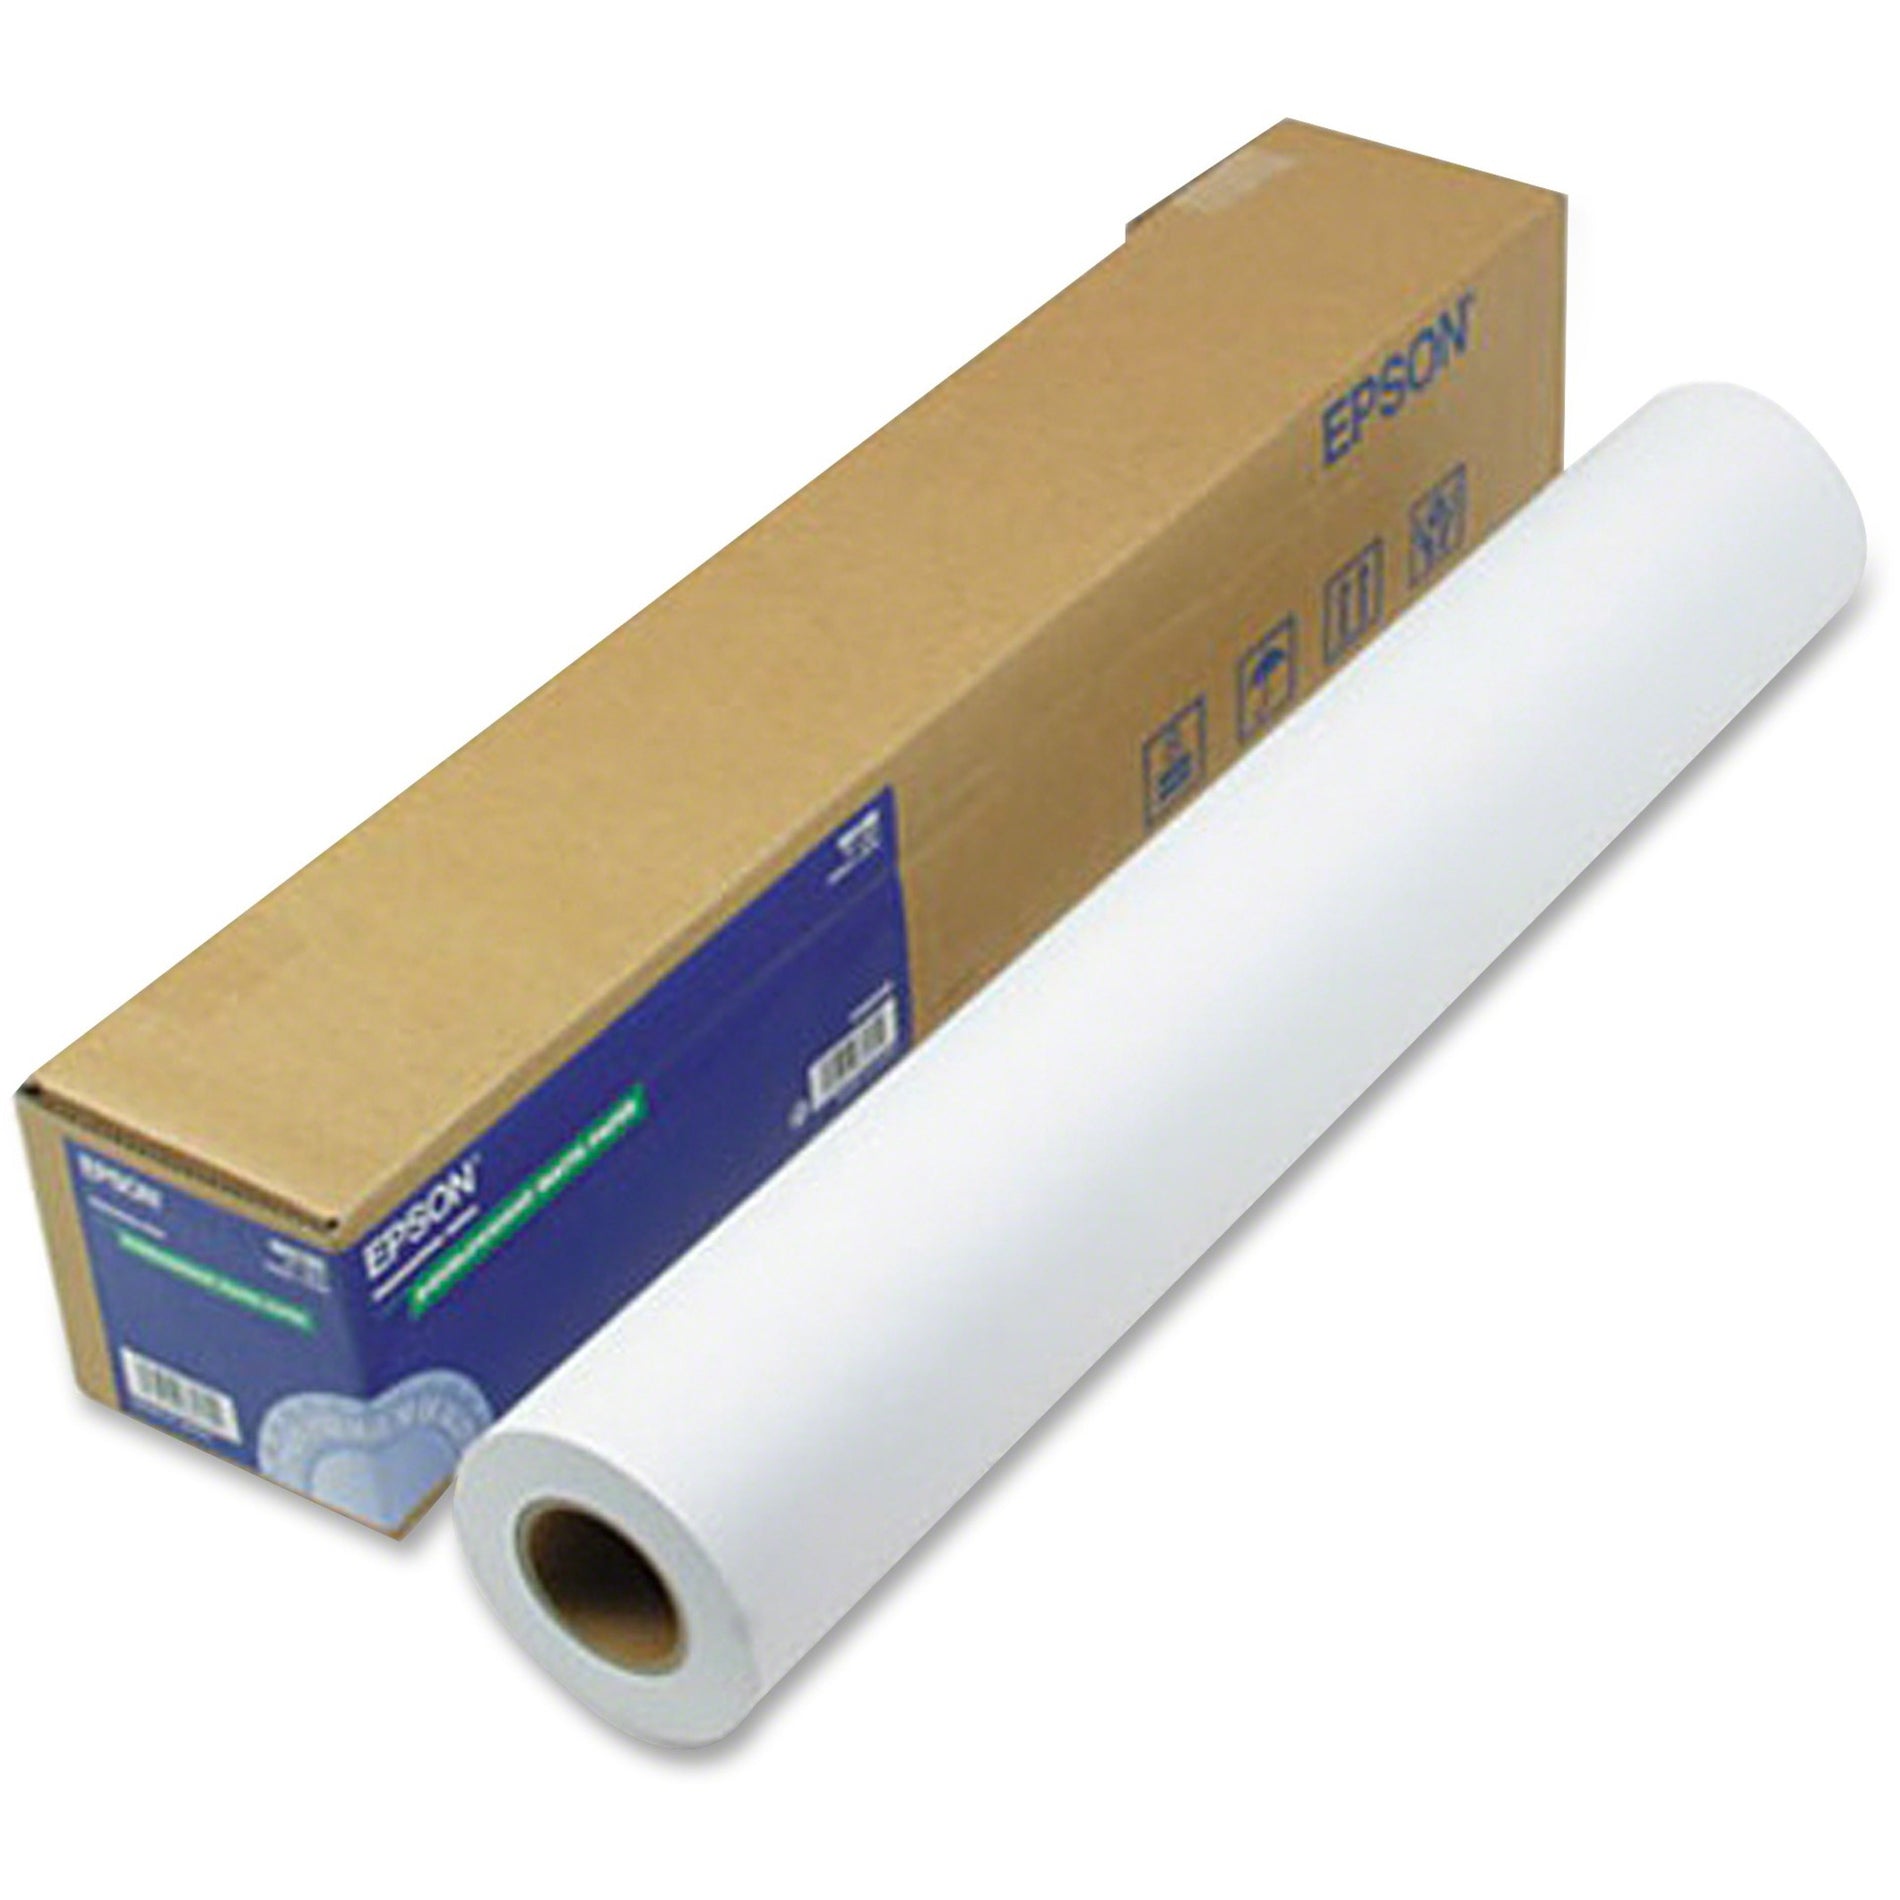 Epson S041385 Photographic Papers, Doubleweight Thickness, Instant Drying, High Color Gamut, Versatile and Affordable